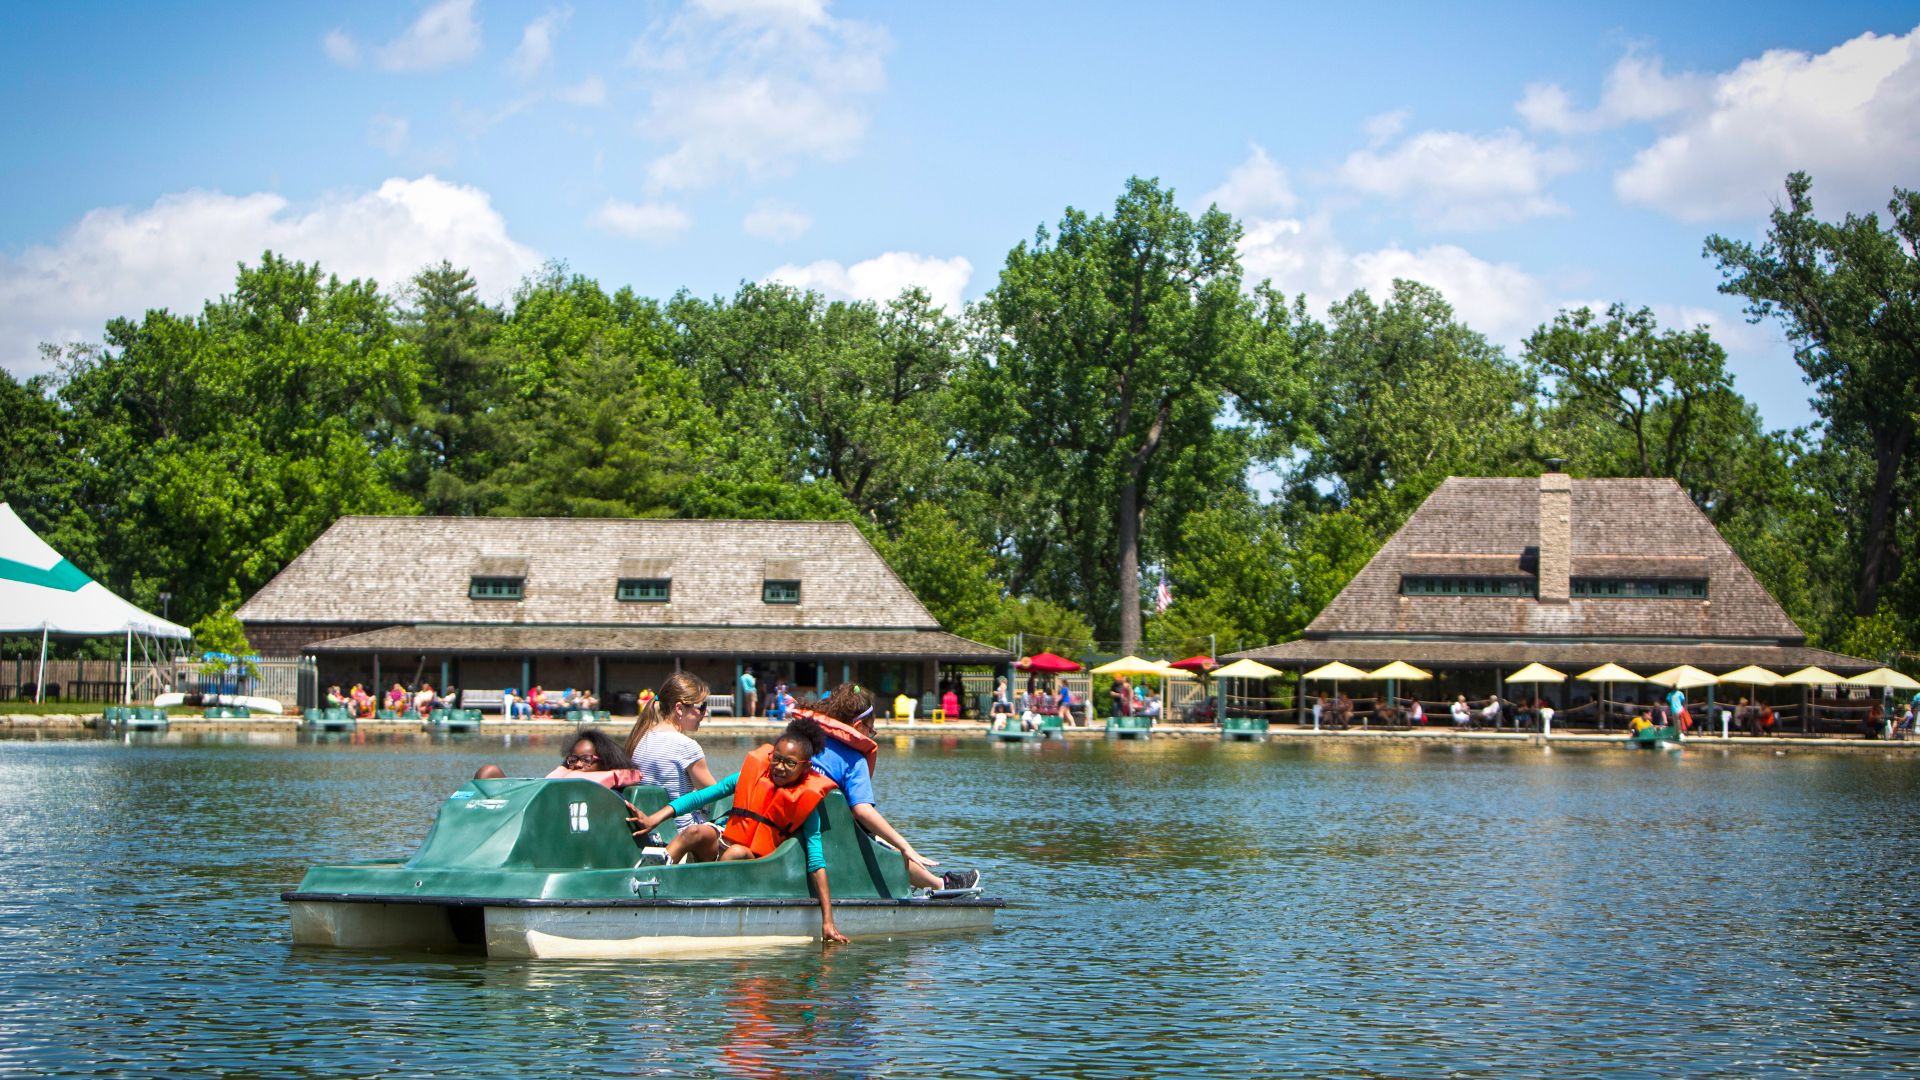 A family uses a paddle boat to explore the Emerson Grand Basin in Forest Park.